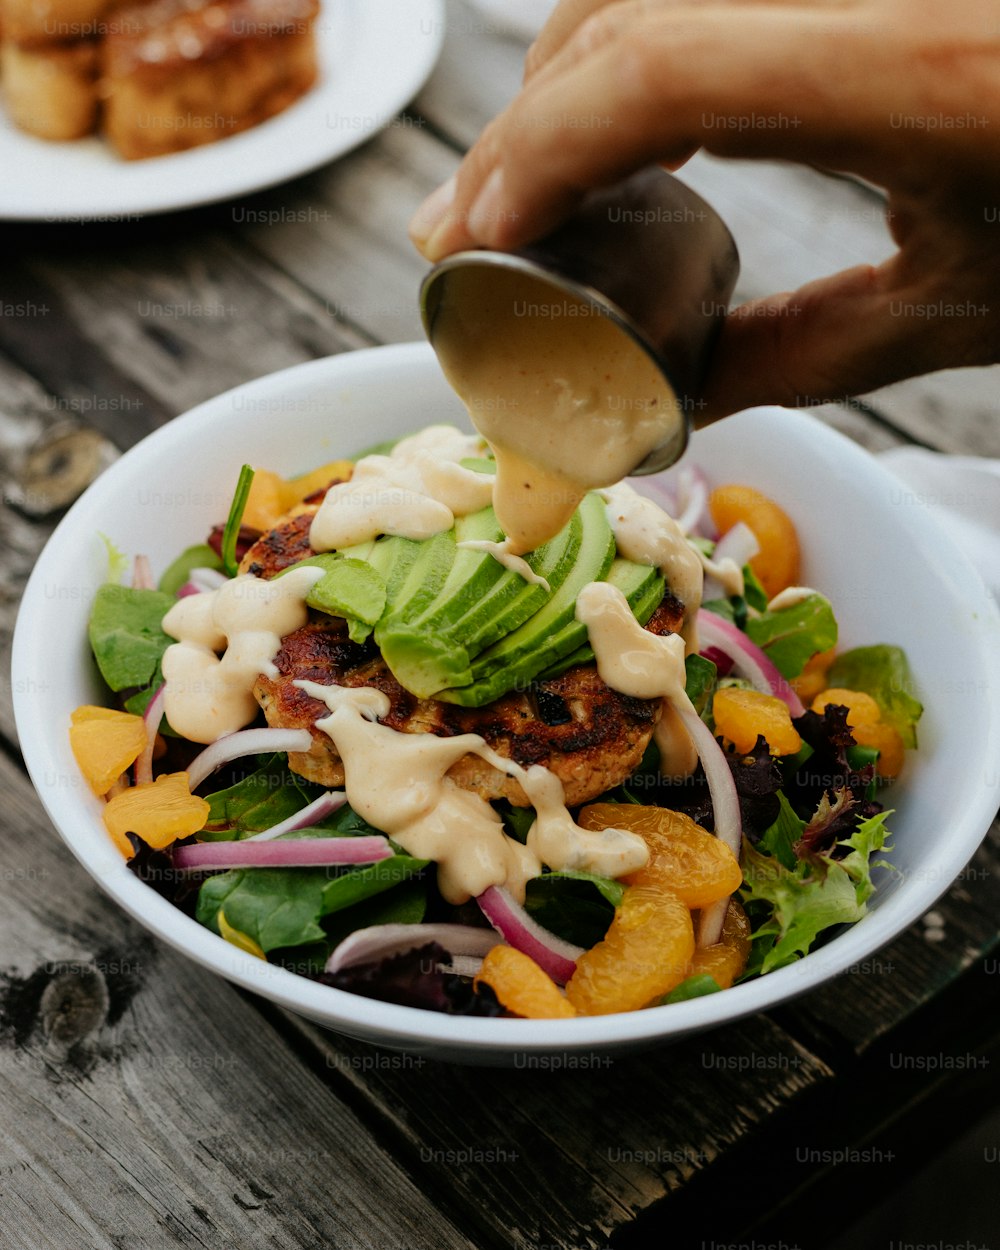 a person pouring dressing on a salad in a bowl